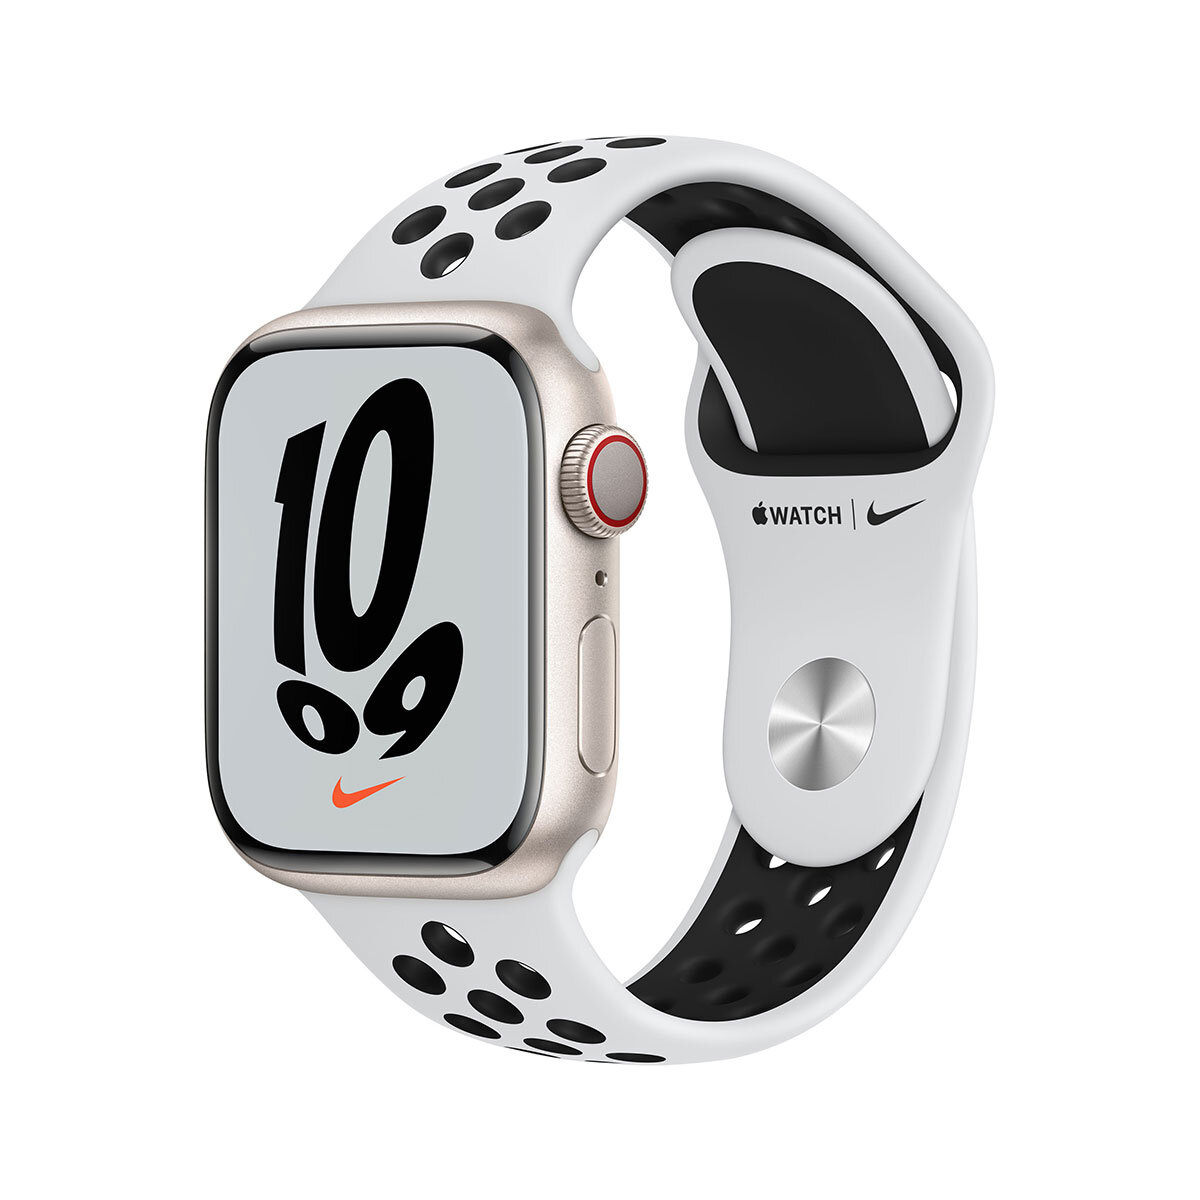 Buy Apple Watch Nike Series 7 GPS + Cellular, 41mm Aluminium Case with Nike Sport Band at costco.co.uk